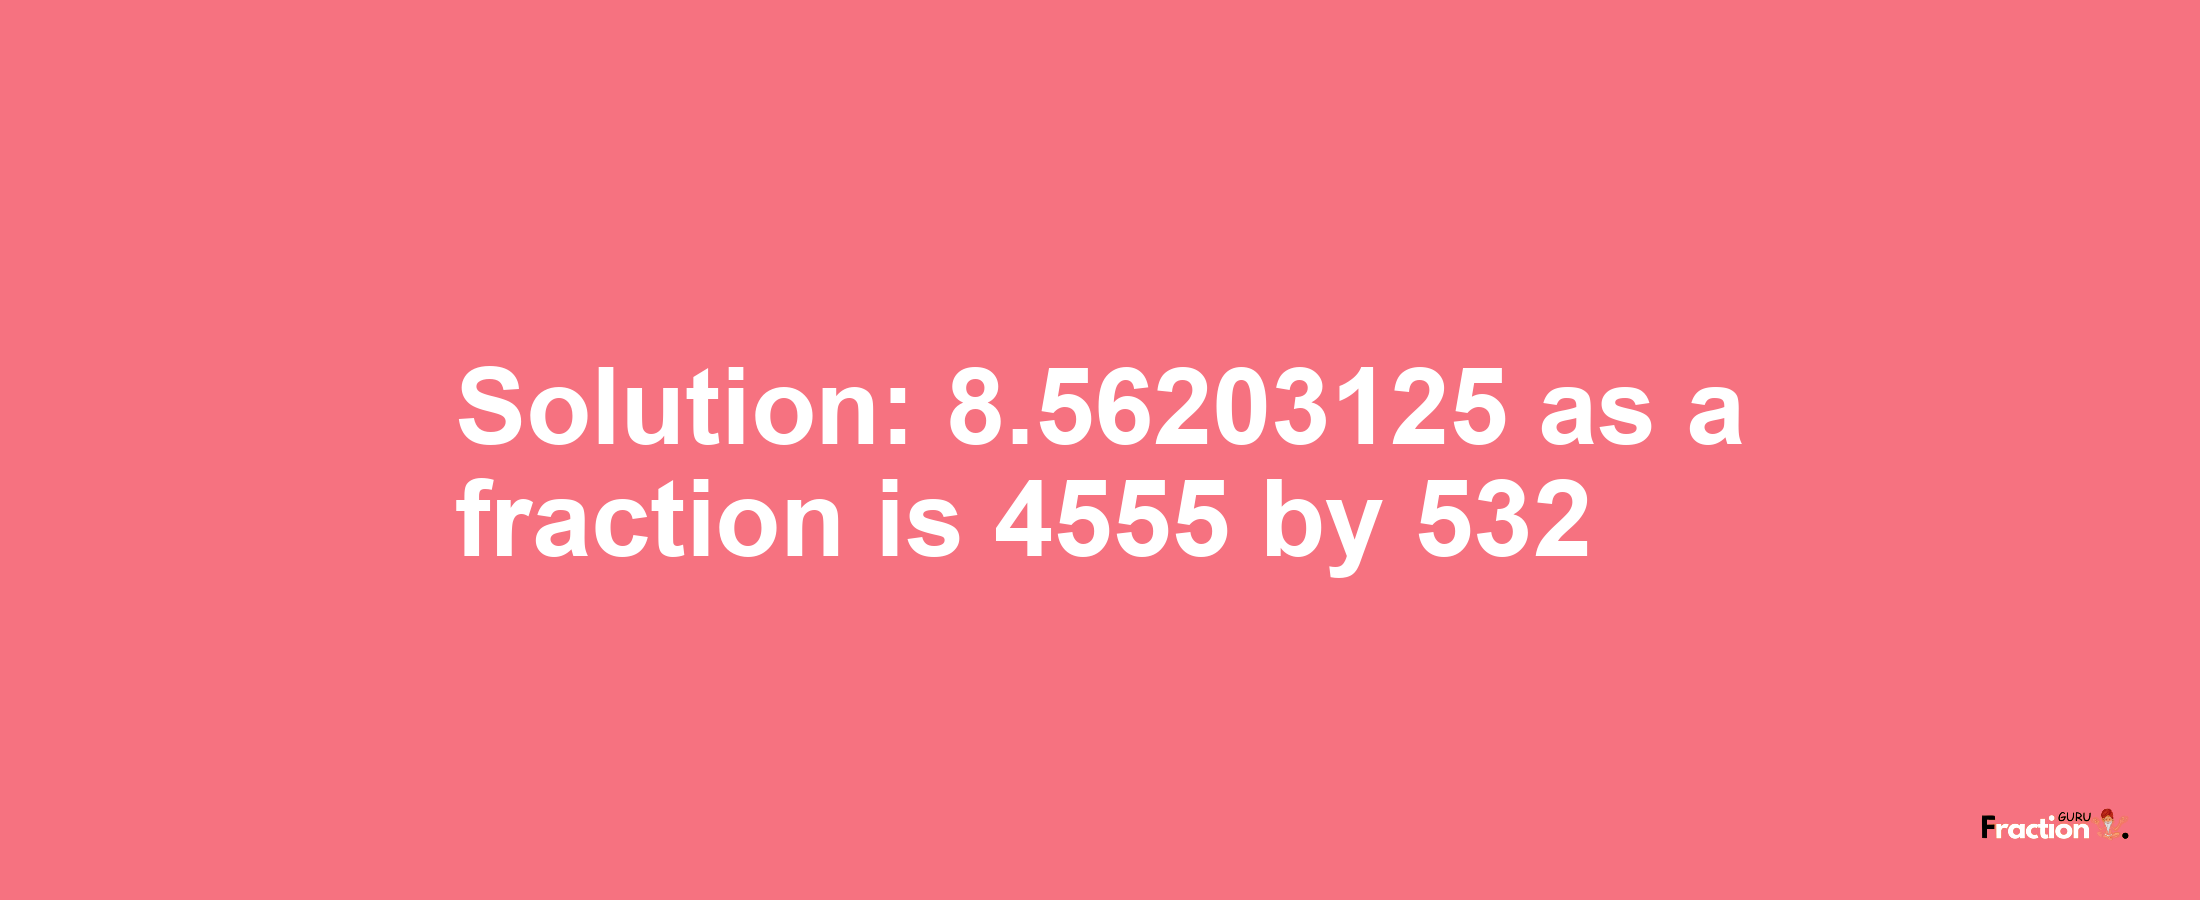 Solution:8.56203125 as a fraction is 4555/532